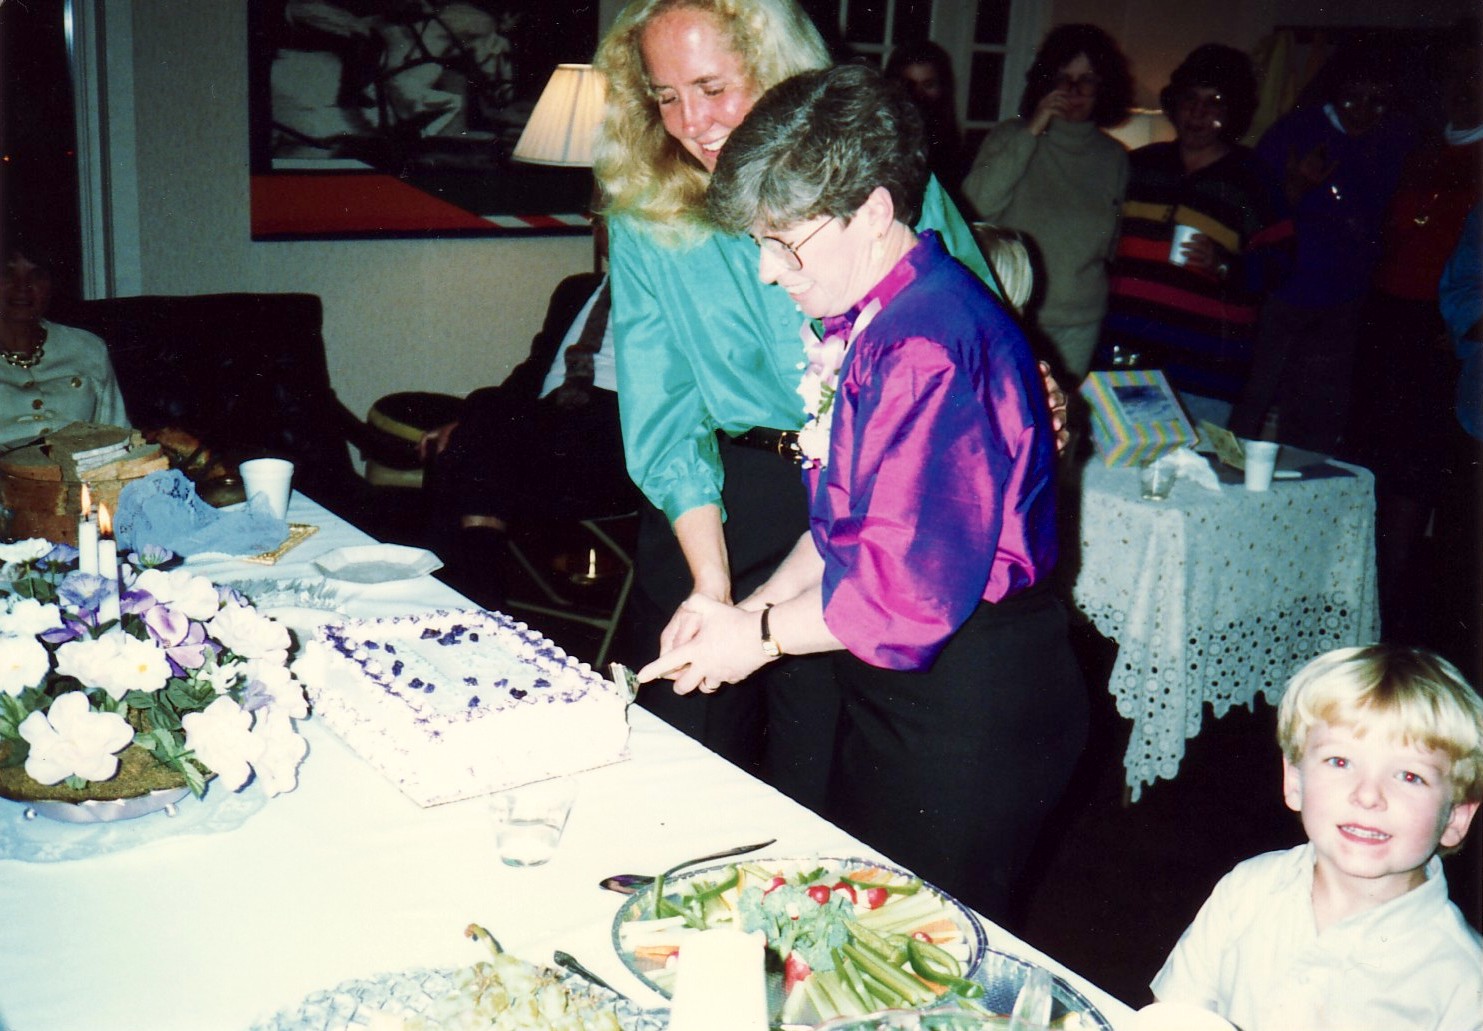 Jennifer Crossen and Joan Callahan (her partner) cut into a cake to celebrate their commitment ceremony while their son David Crossen smiles at the camera, Lexington, KY, 1989. The ceremony was officiated at their house with a minister from the Unitarian Church.